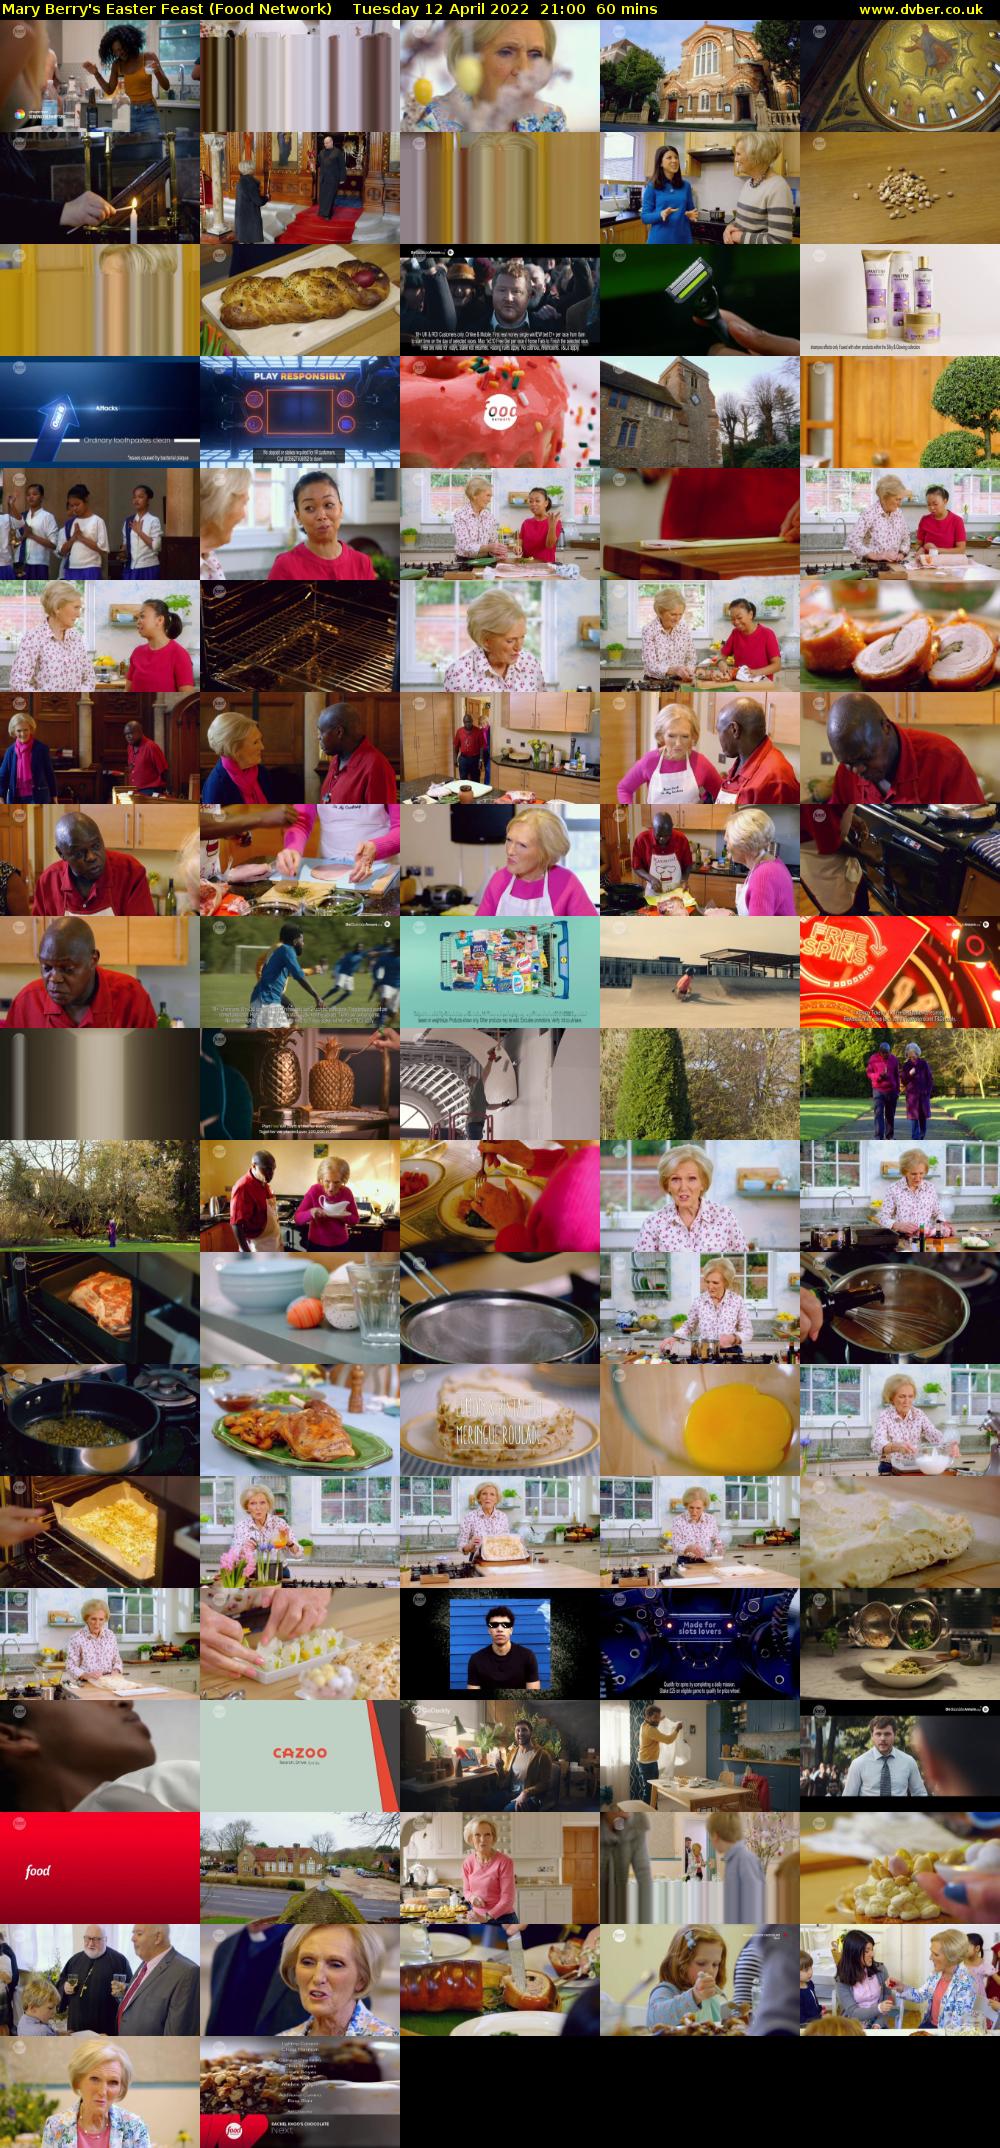 Mary Berry's Easter Feast (Food Network) Tuesday 12 April 2022 21:00 - 22:00